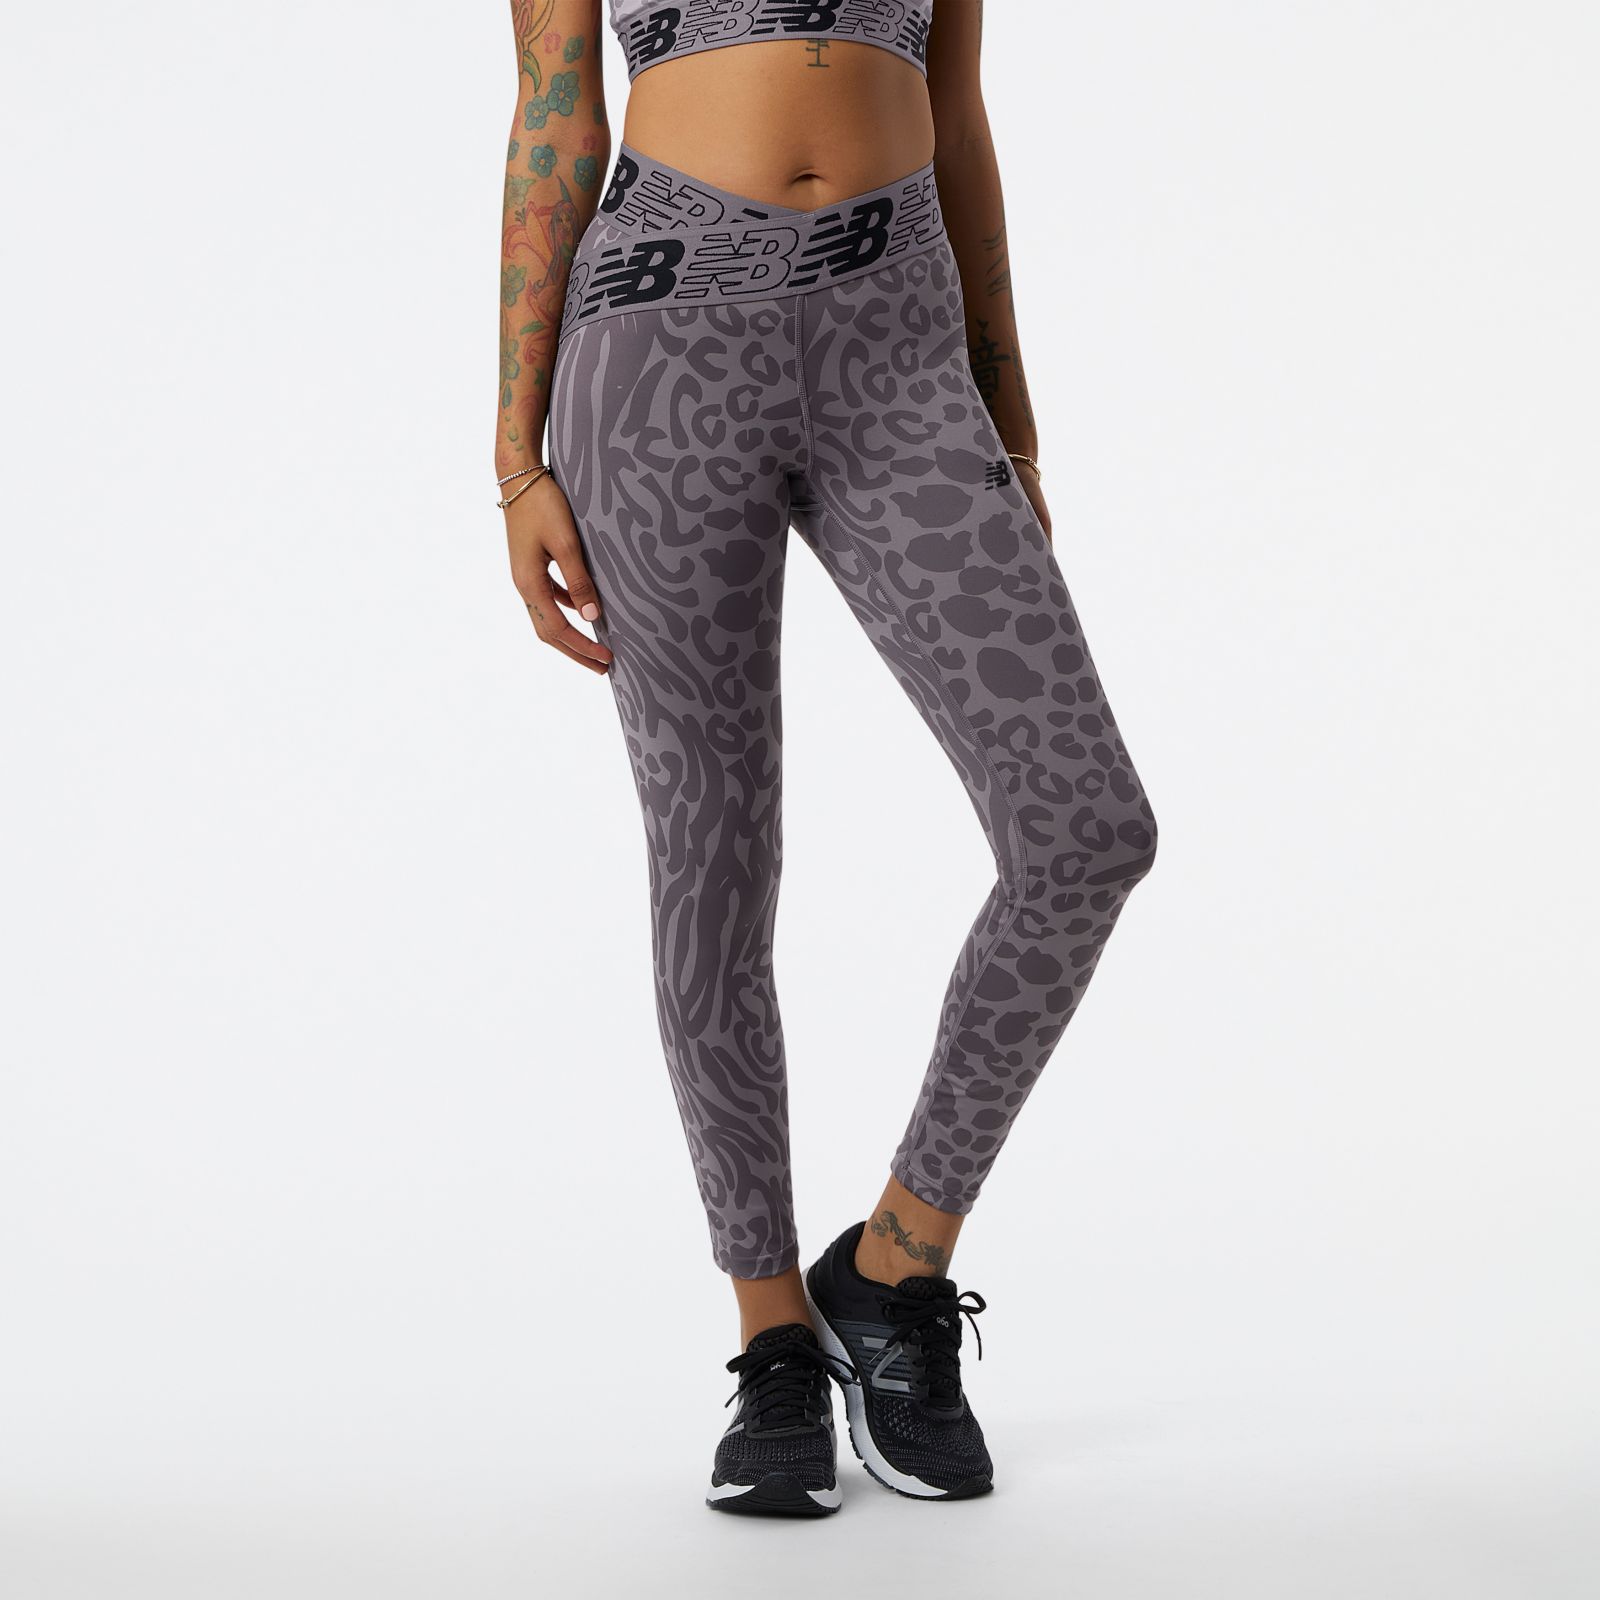 Nike Womens Sparkle 7/8 Tights